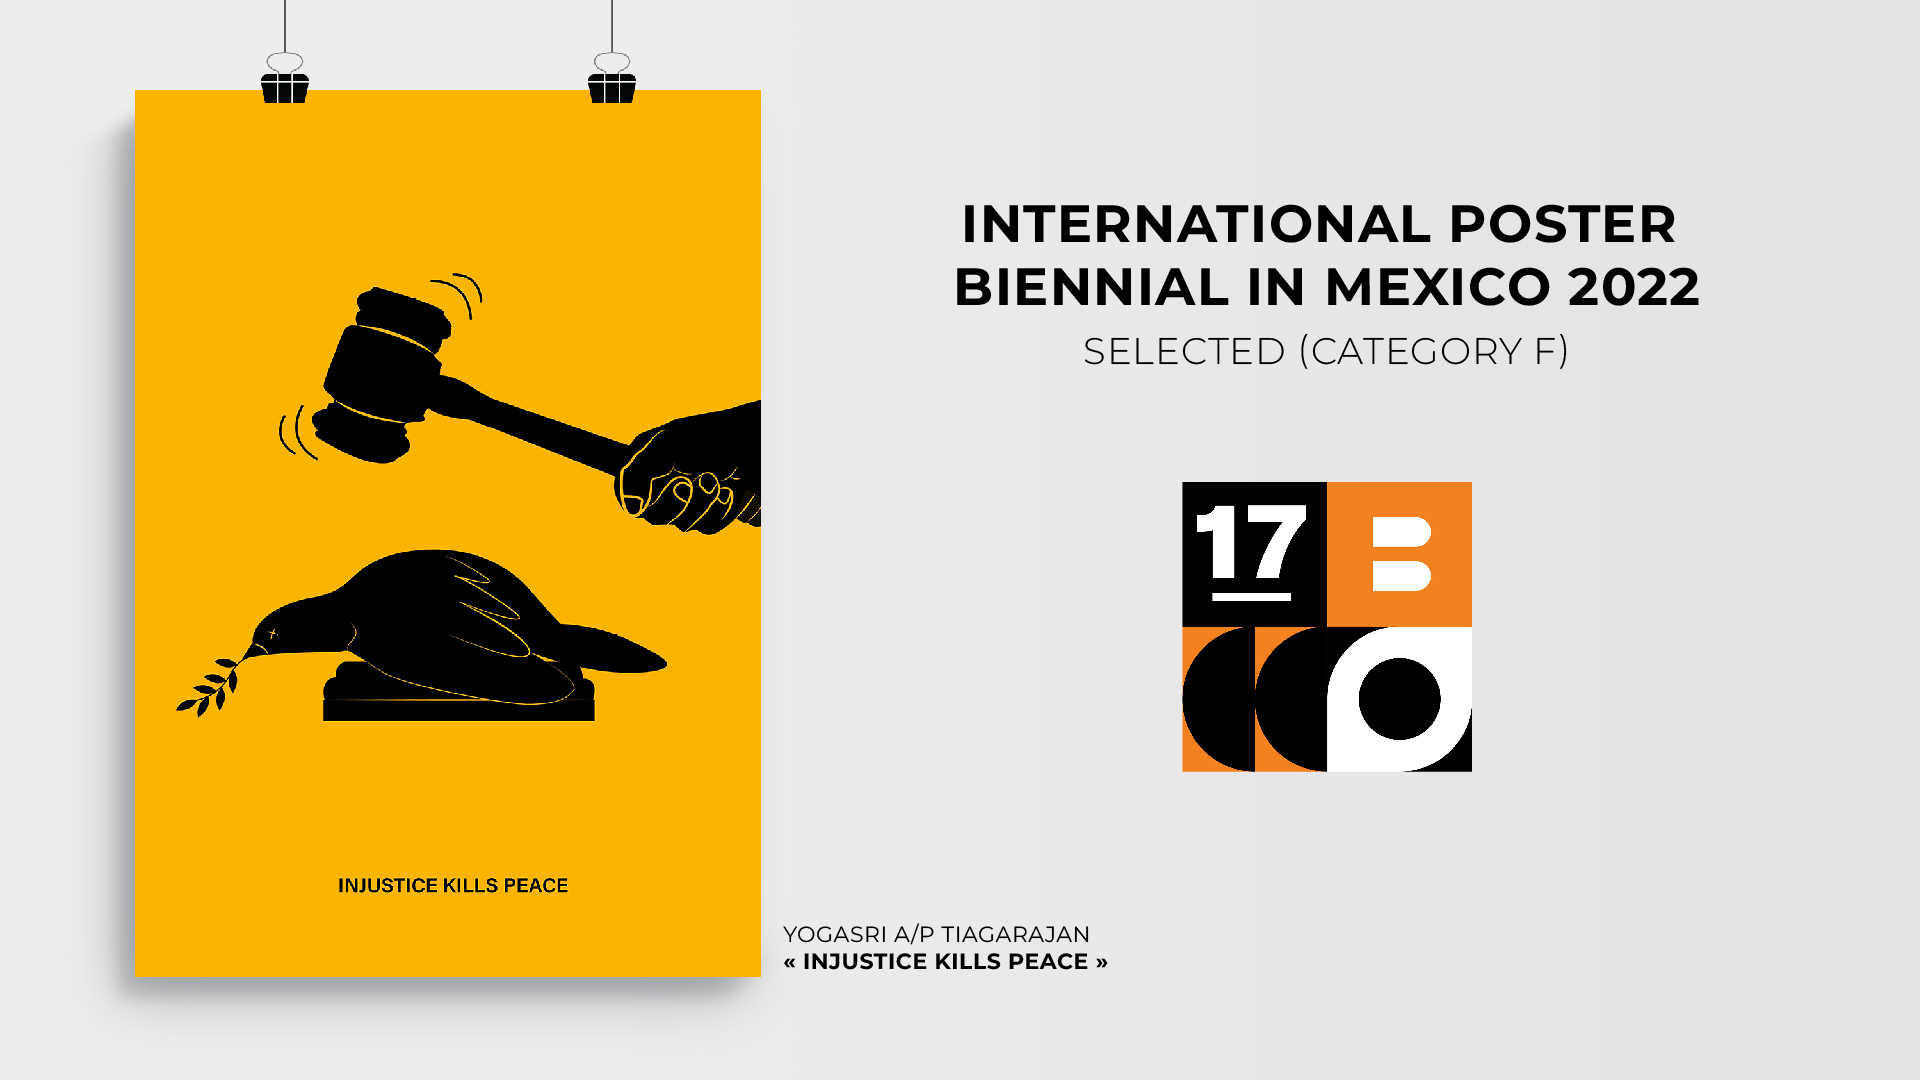 The International Poster Biennial in Mexico is one of the oldest in the world, being a precursor of its kind in the American continent. With more than 30 years of experience